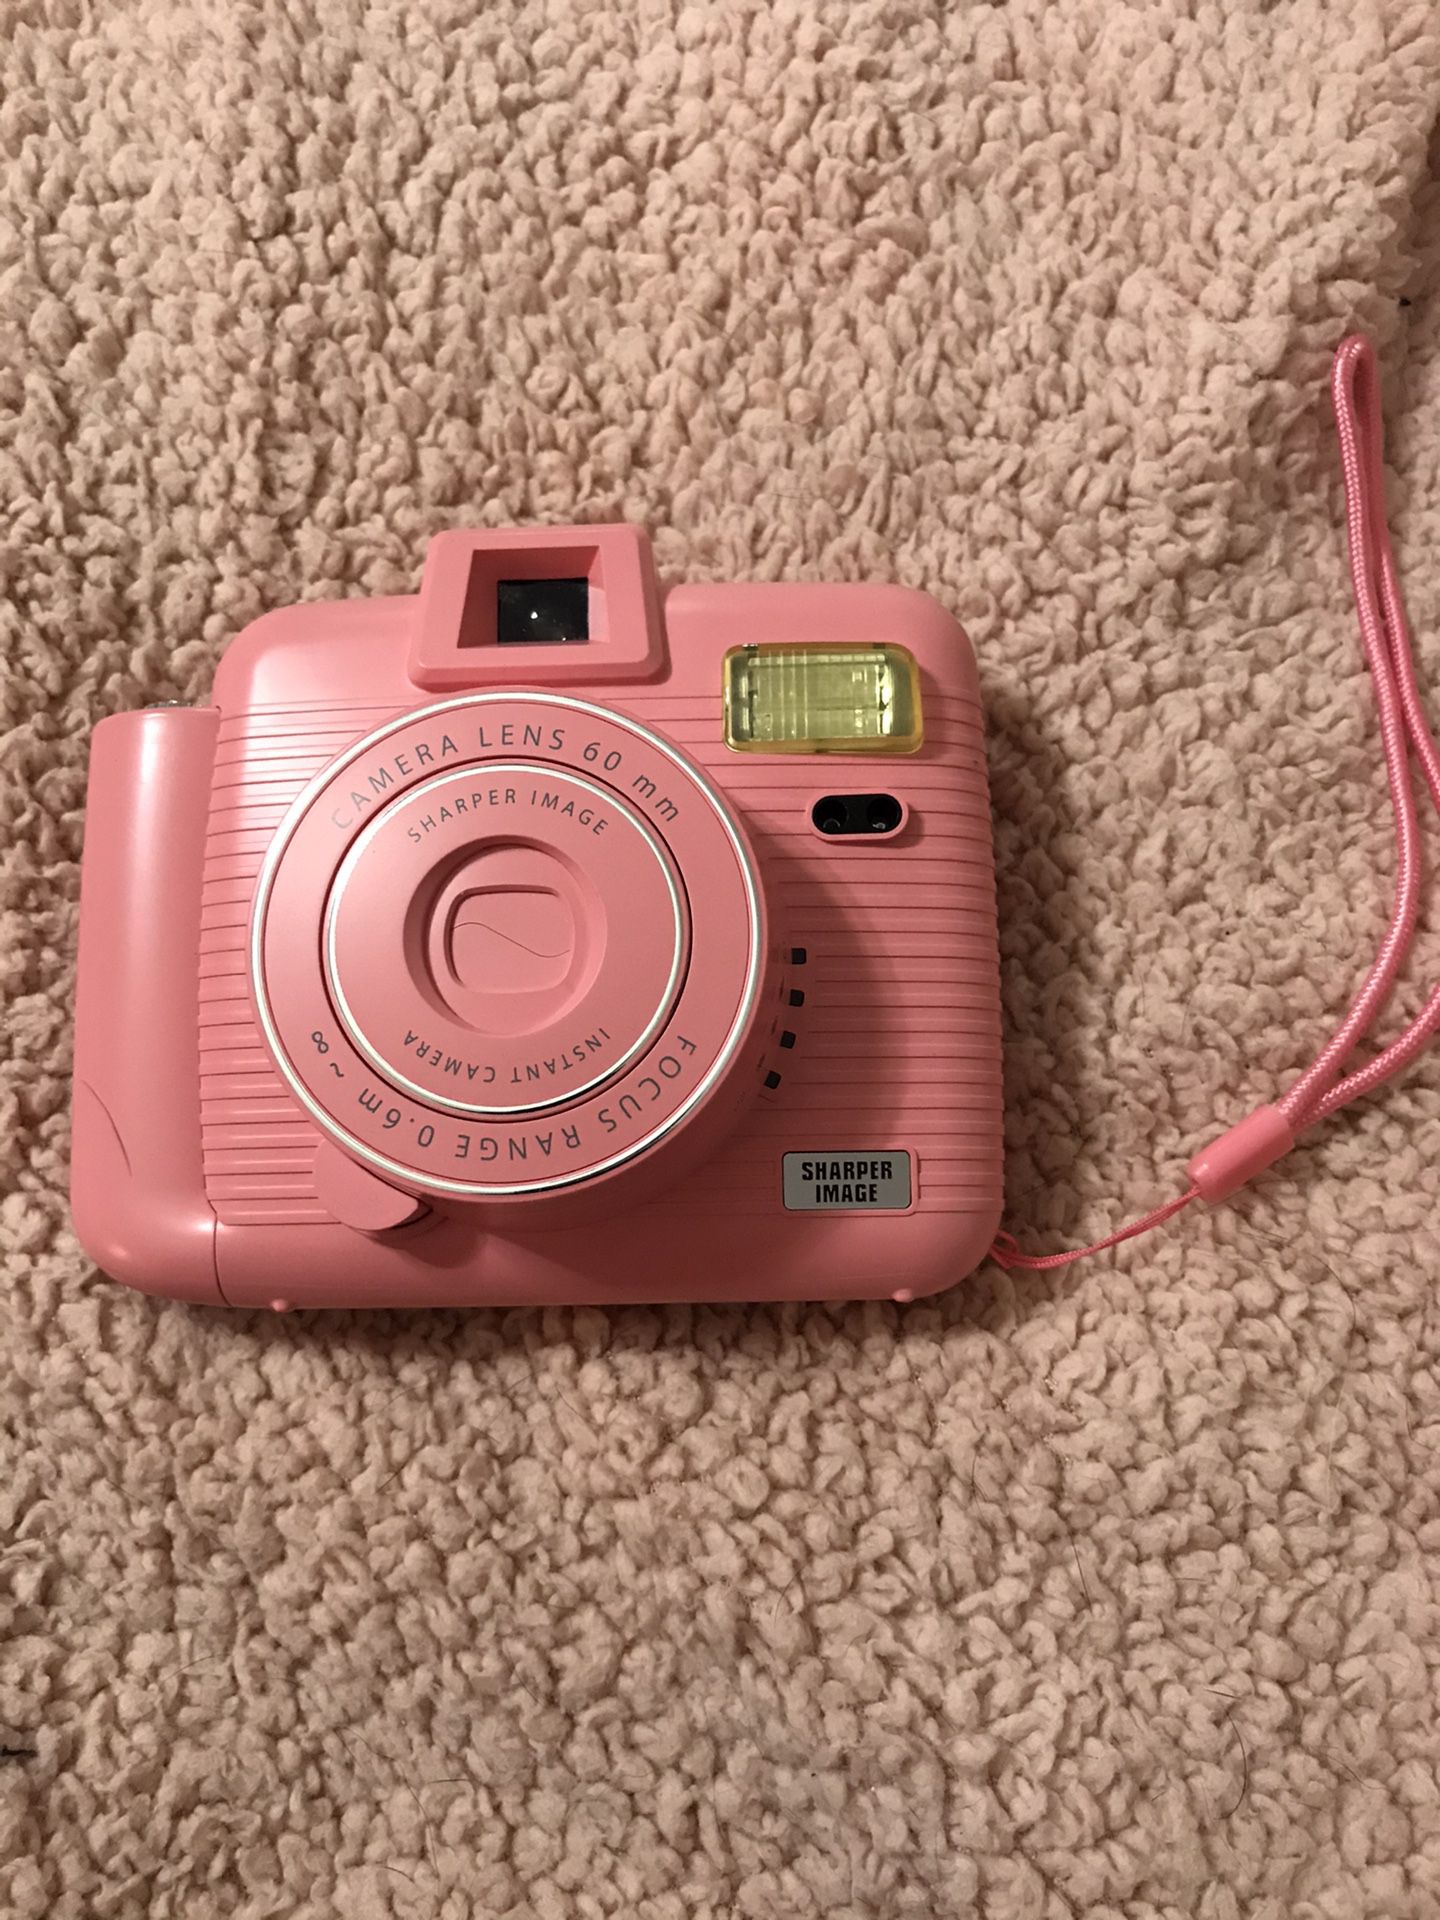 Instant Camera. Used Once. Only $17.00. Make A Great Gift